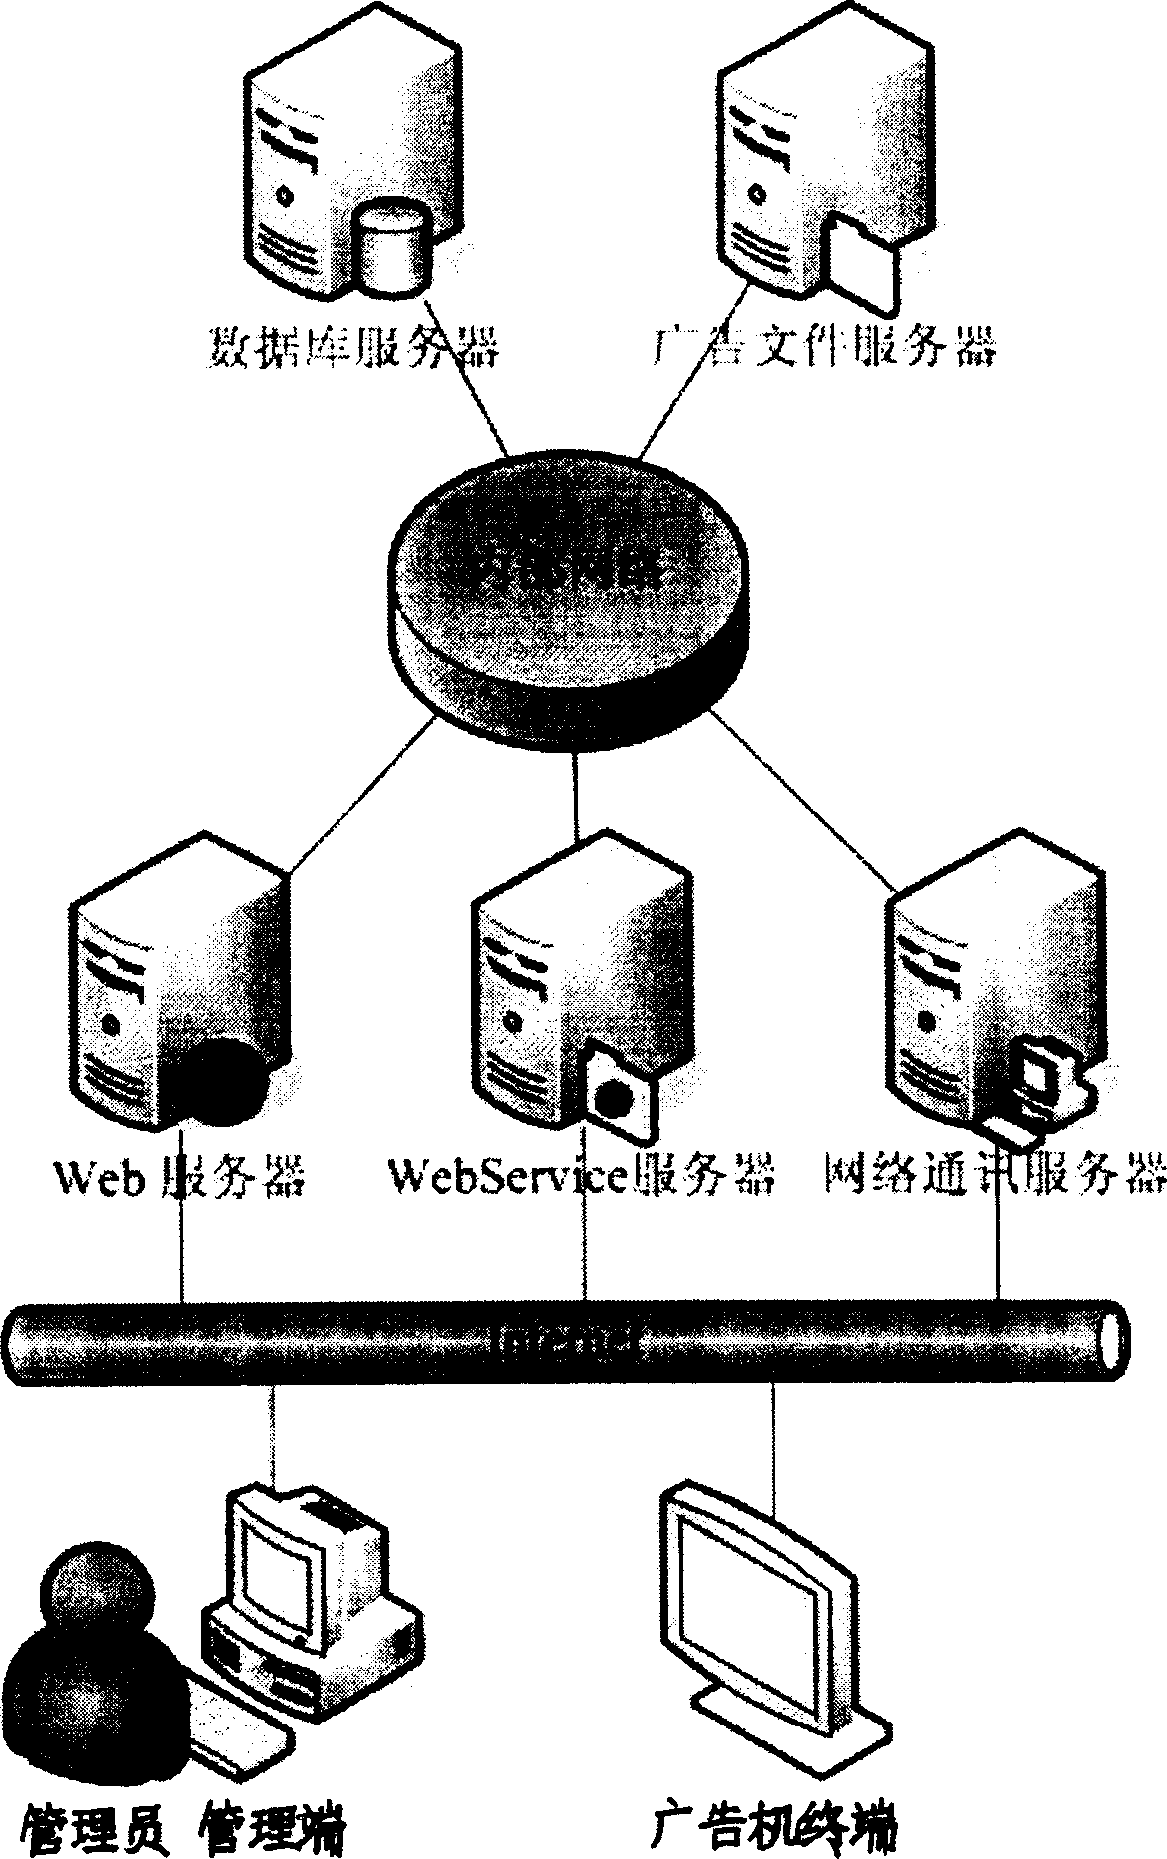 Method for displaying custom-made content displayed in subarea in screen